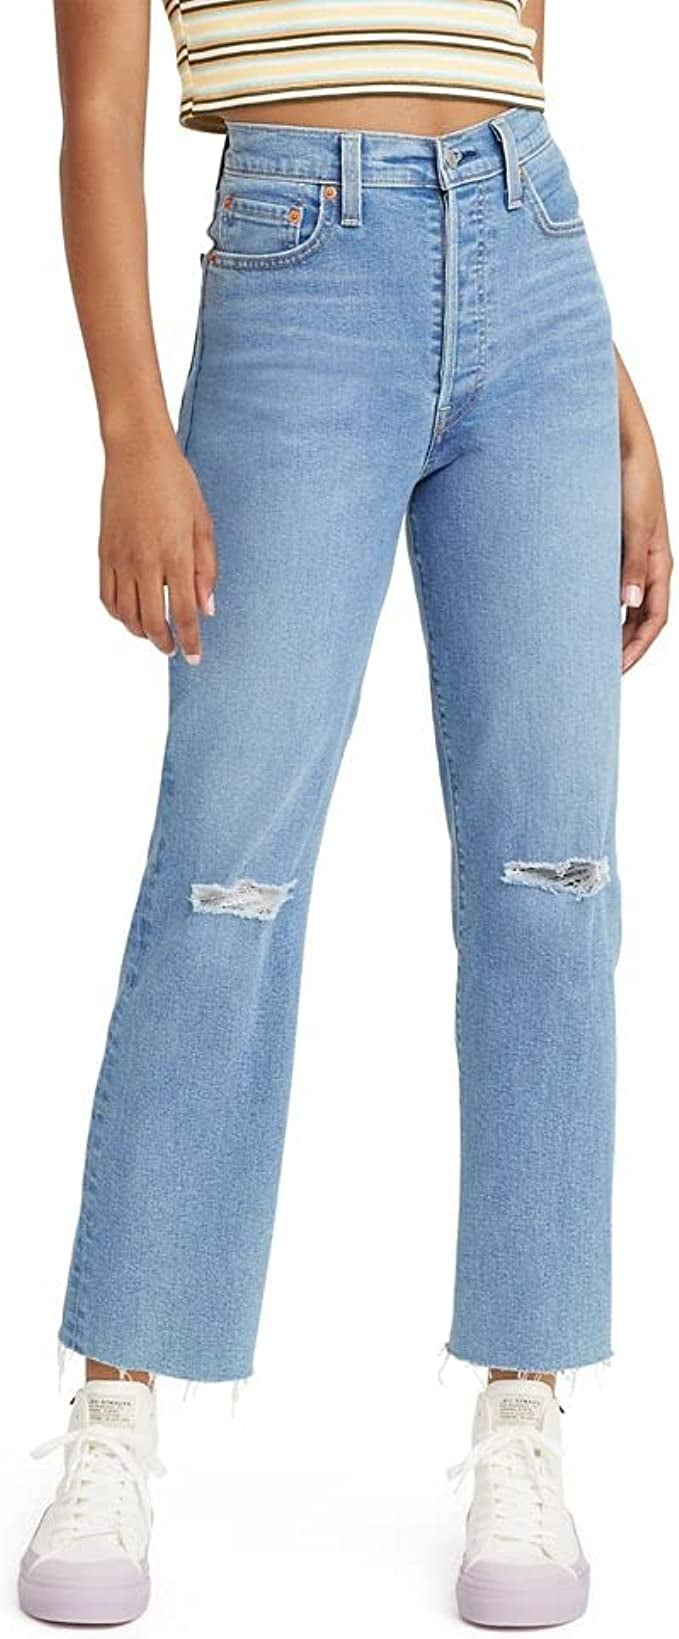 Best Prime Day Deals on Pants and Leggings